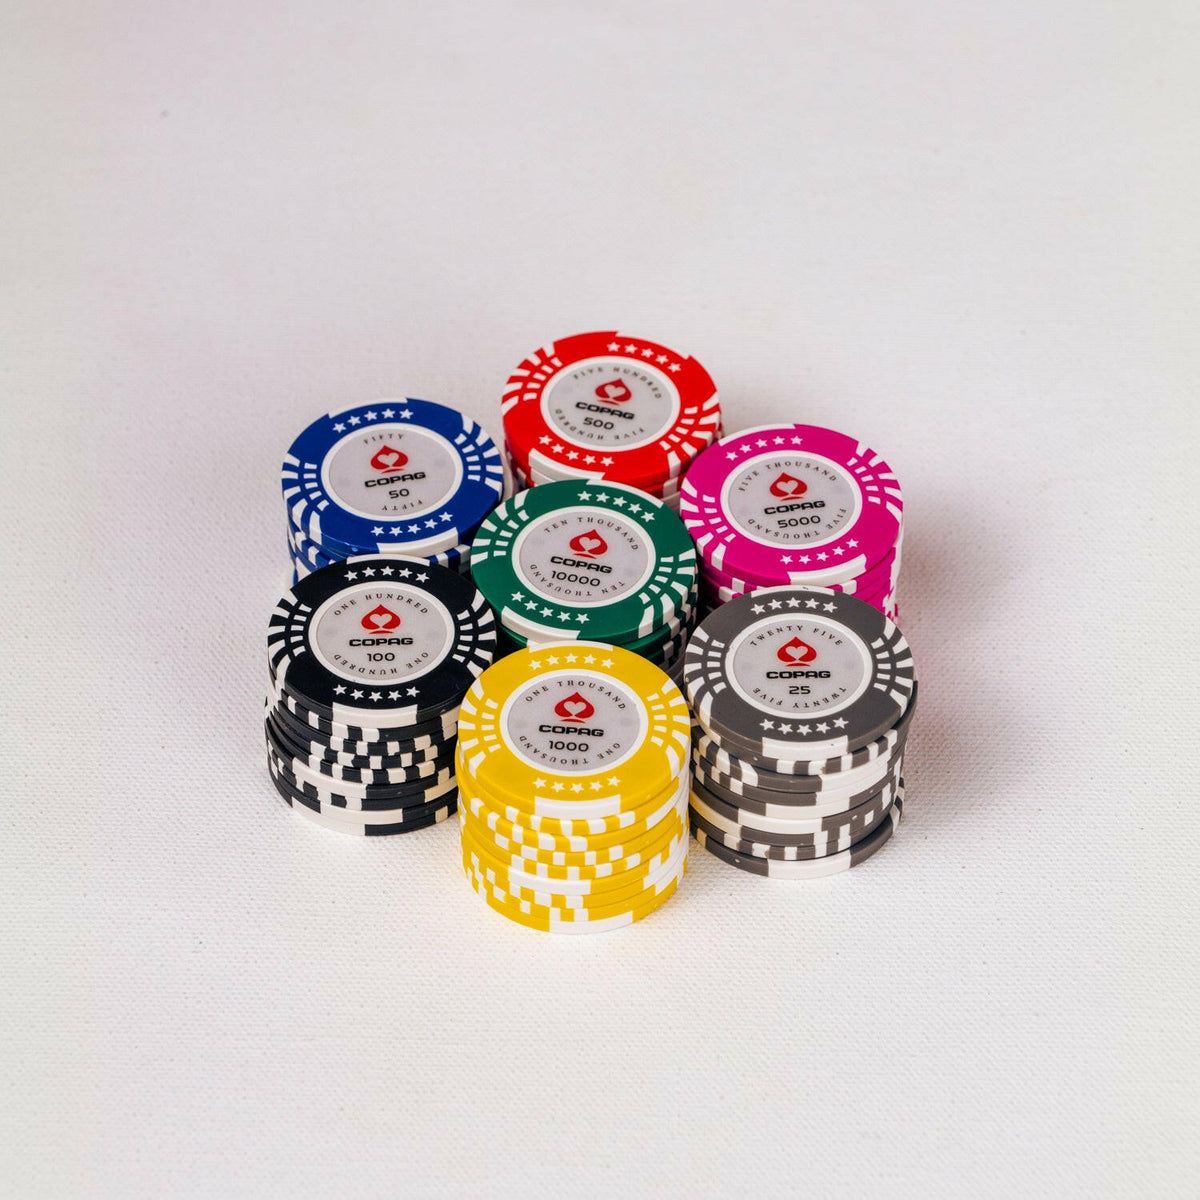 Poker Chips - Buy Online Poker Chips and Casino Chipsets India